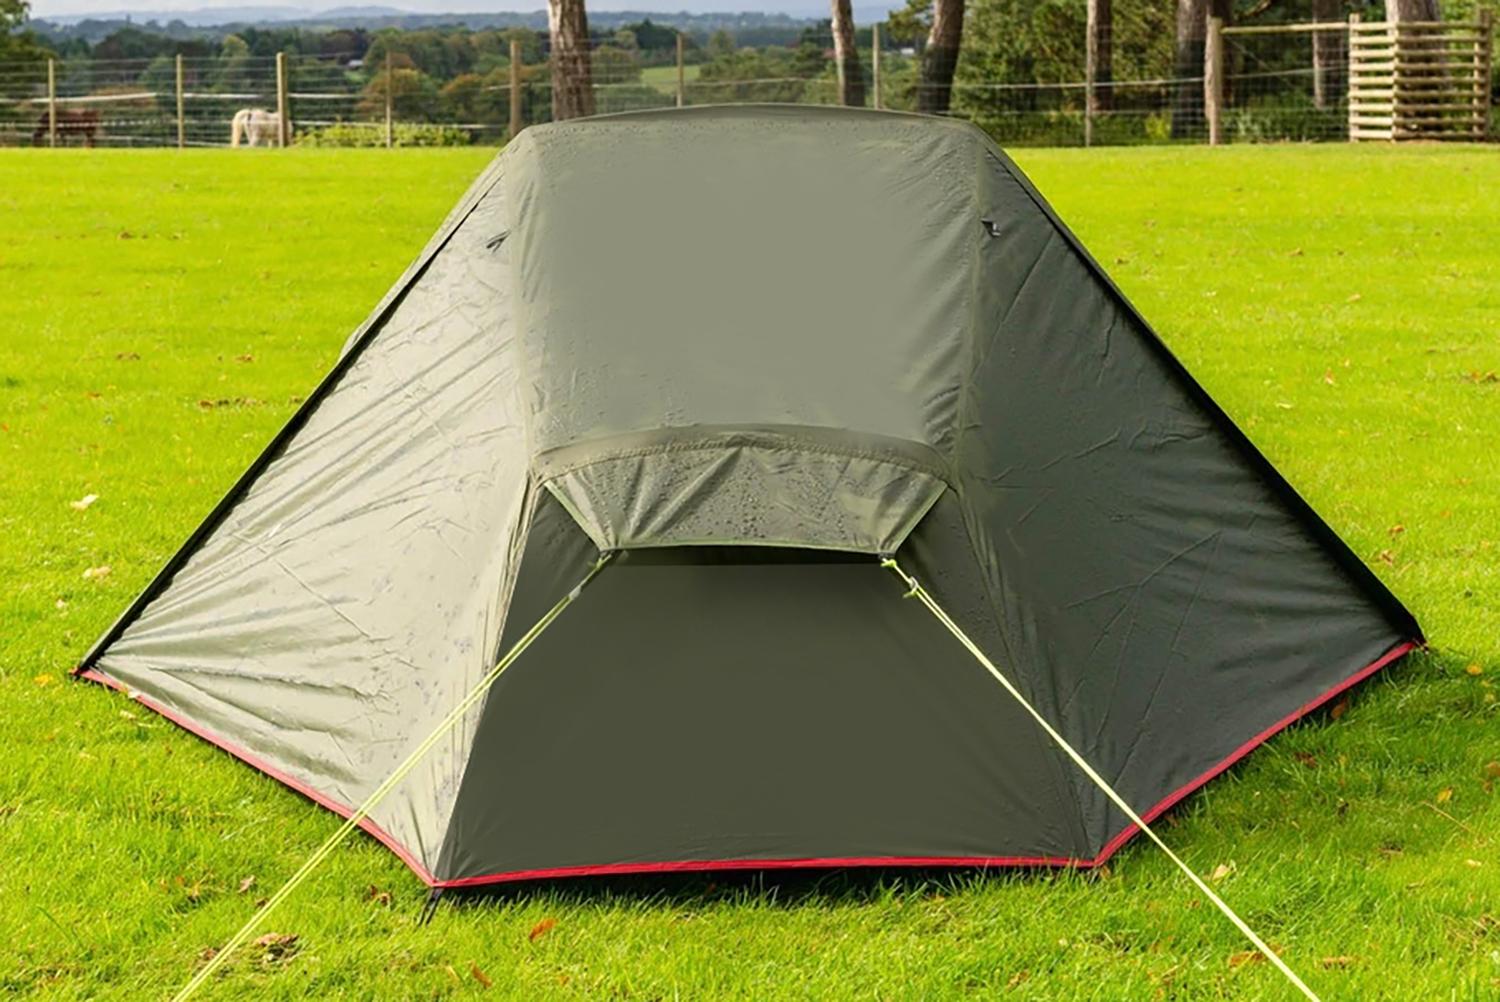 Details about   Tent 3 Person Camping Outdoor Living Family Hiking Tents Light Weight